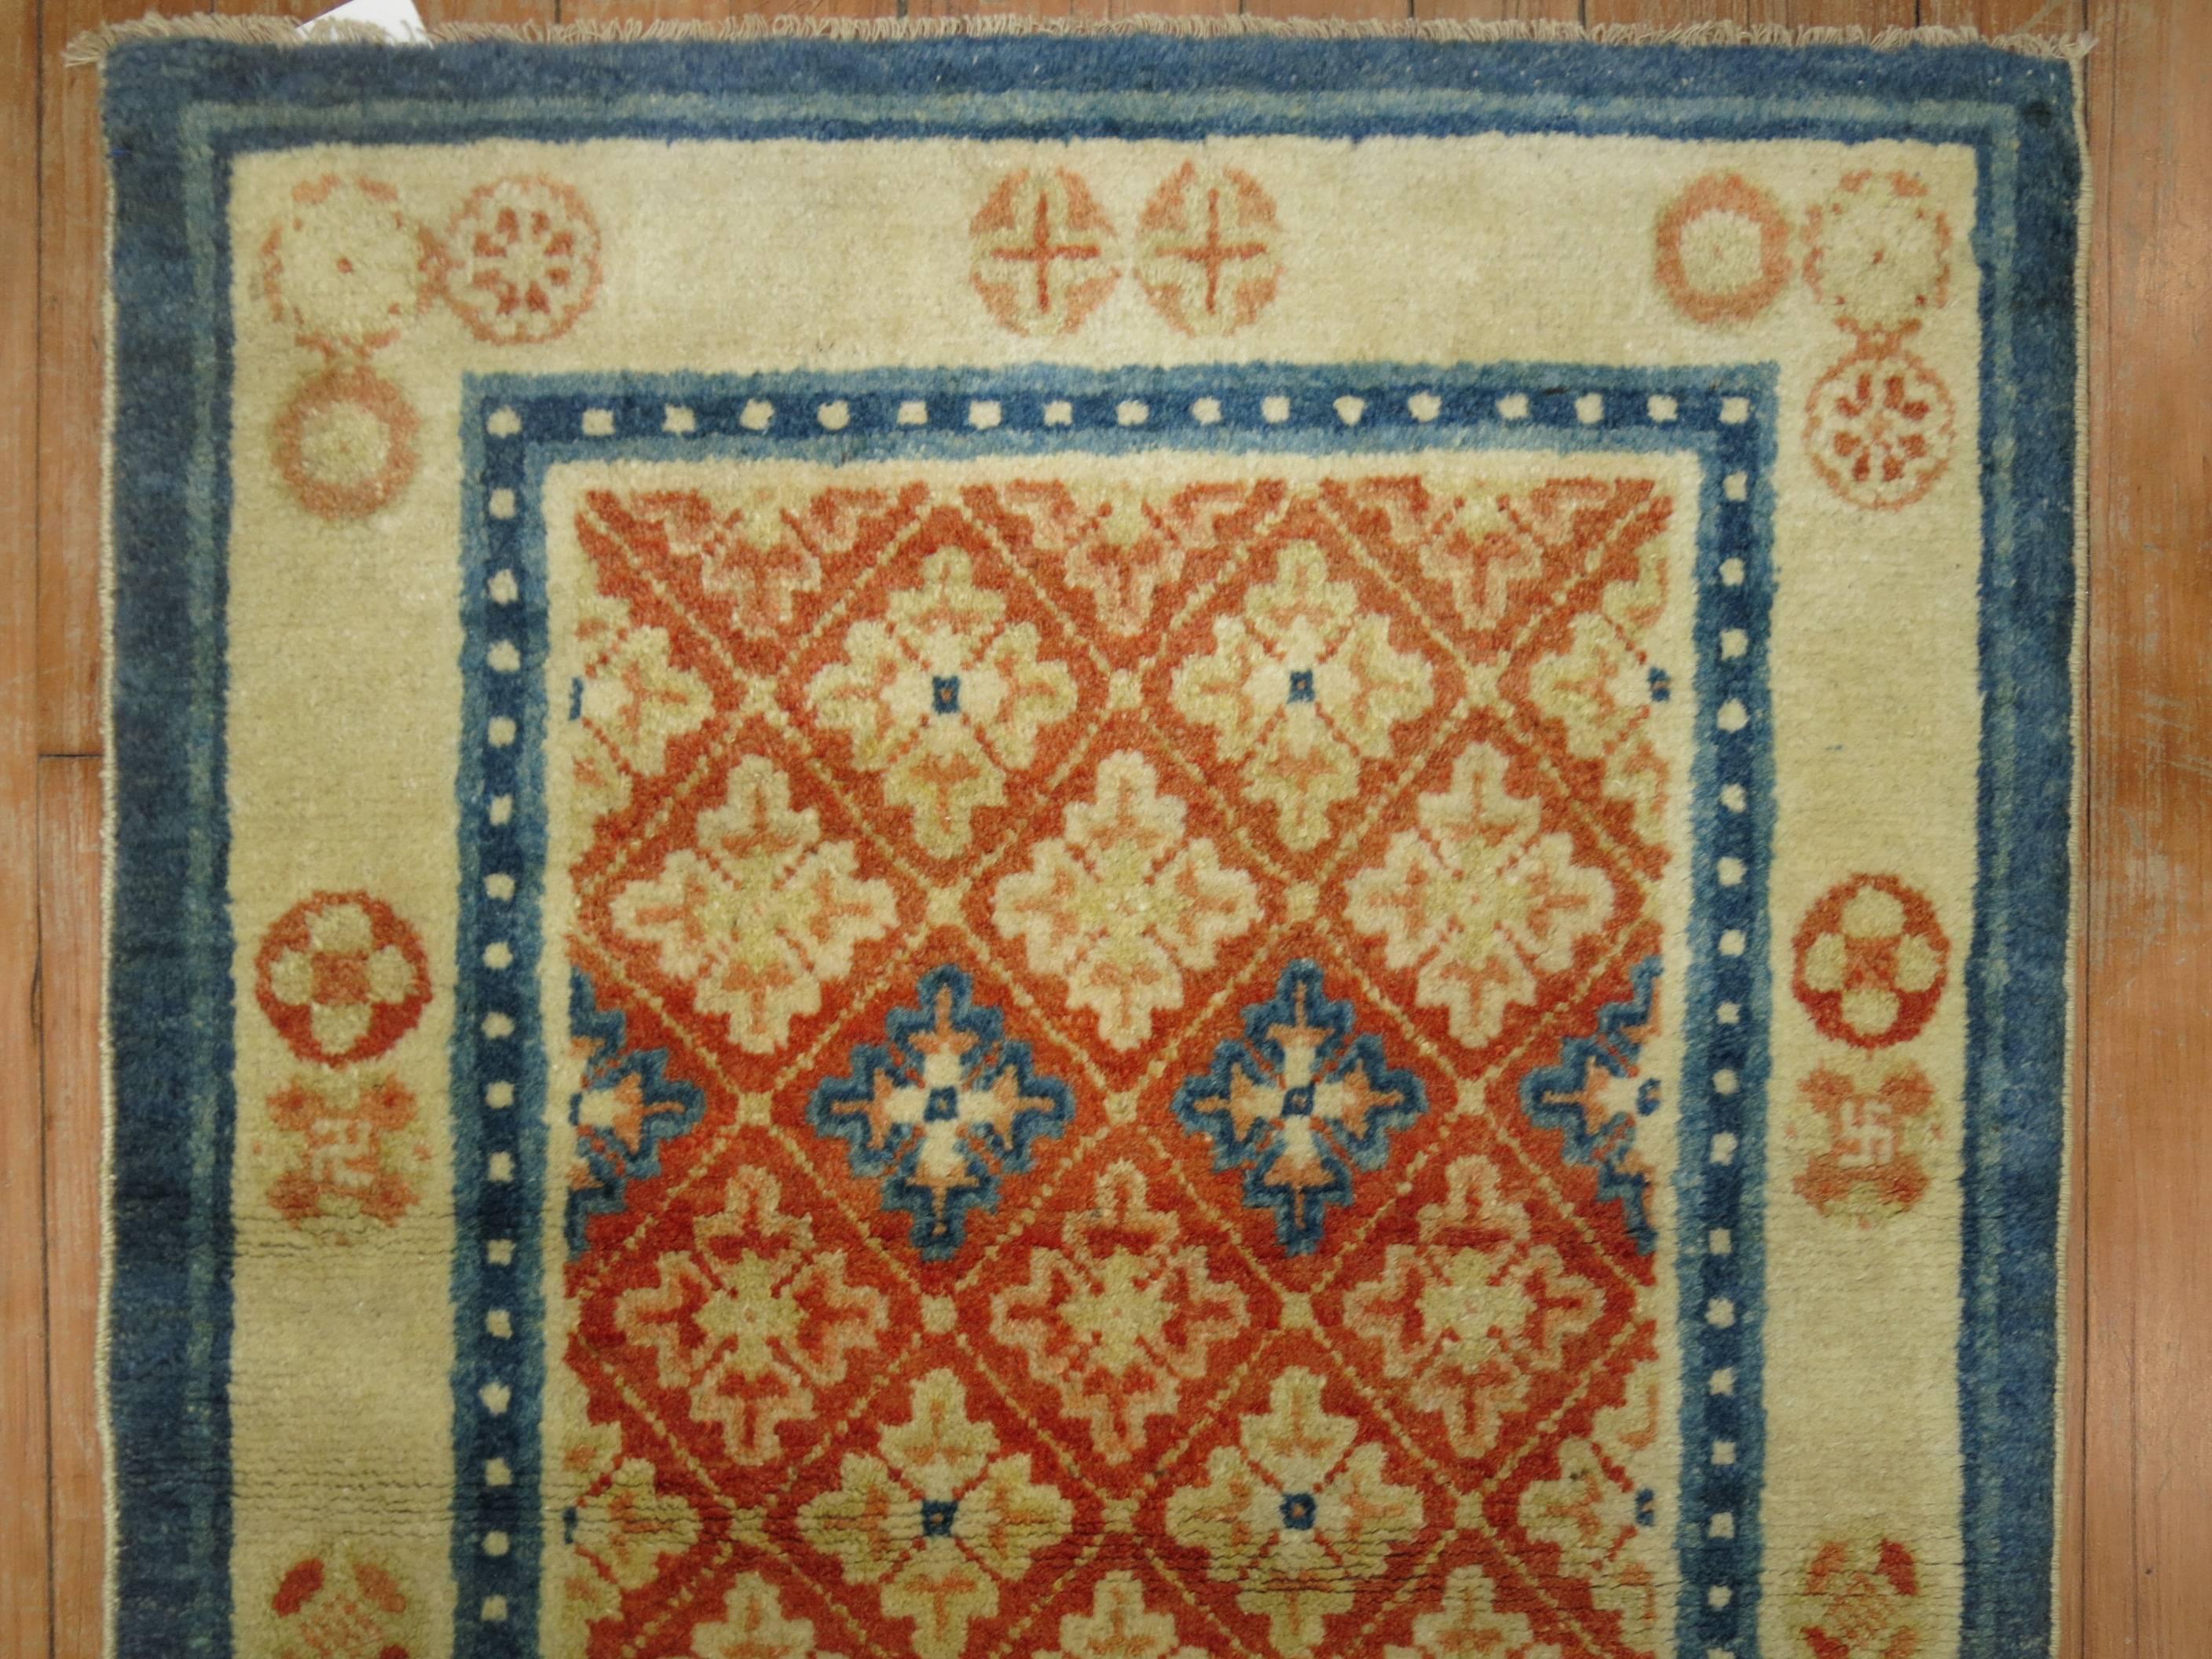 An antique Tibetan throw size wrong with a sweet potato colored ground, accents in tan and blue.